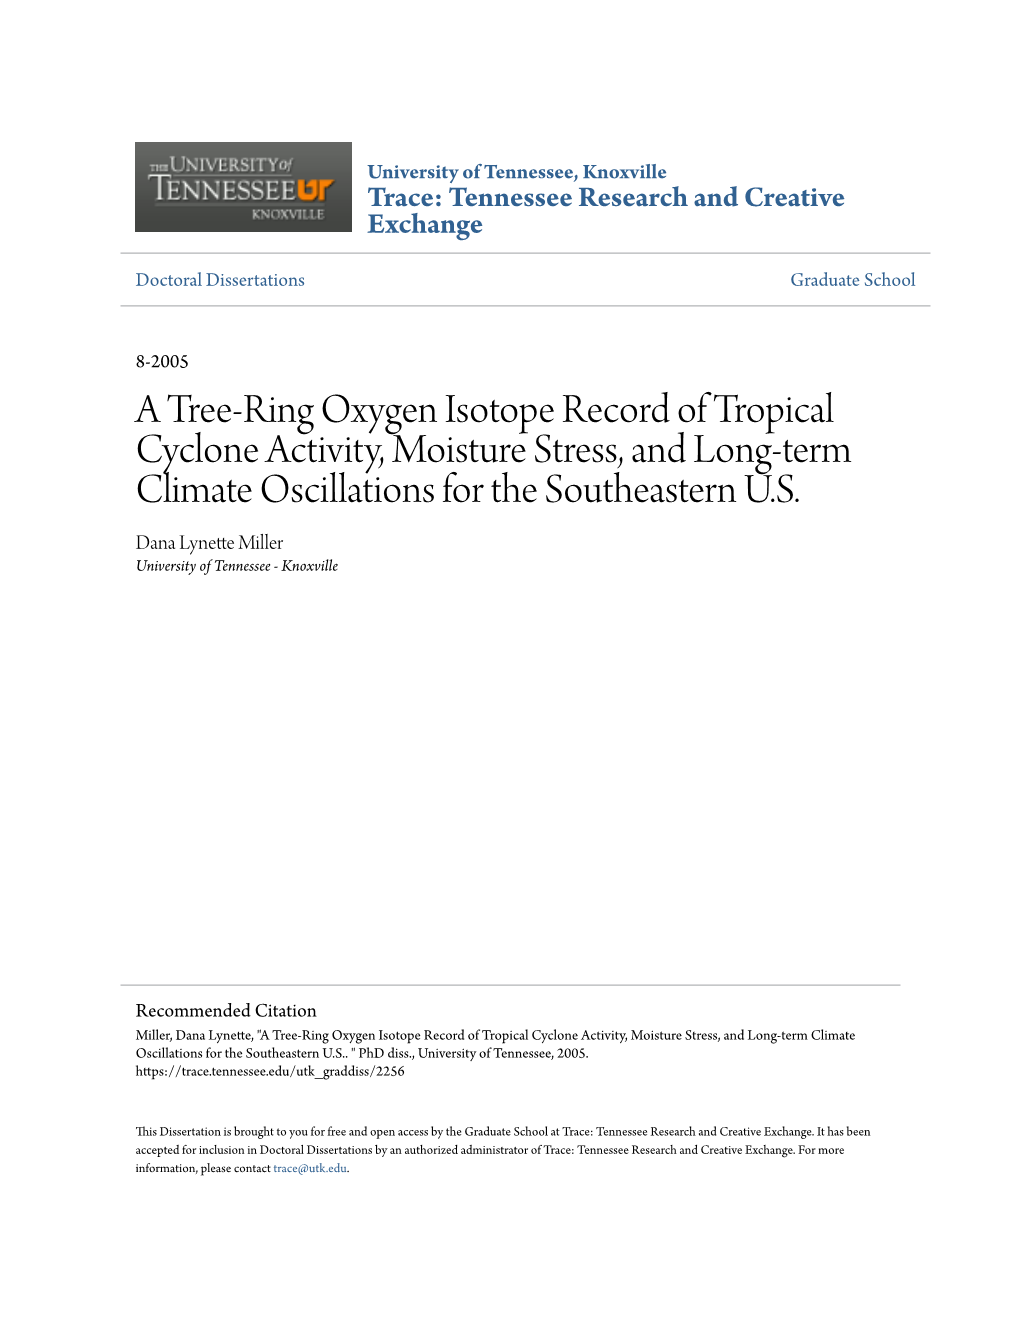 A Tree-Ring Oxygen Isotope Record of Tropical Cyclone Activity, Moisture Stress, and Long-Term Climate Oscillations for the Southeastern U.S